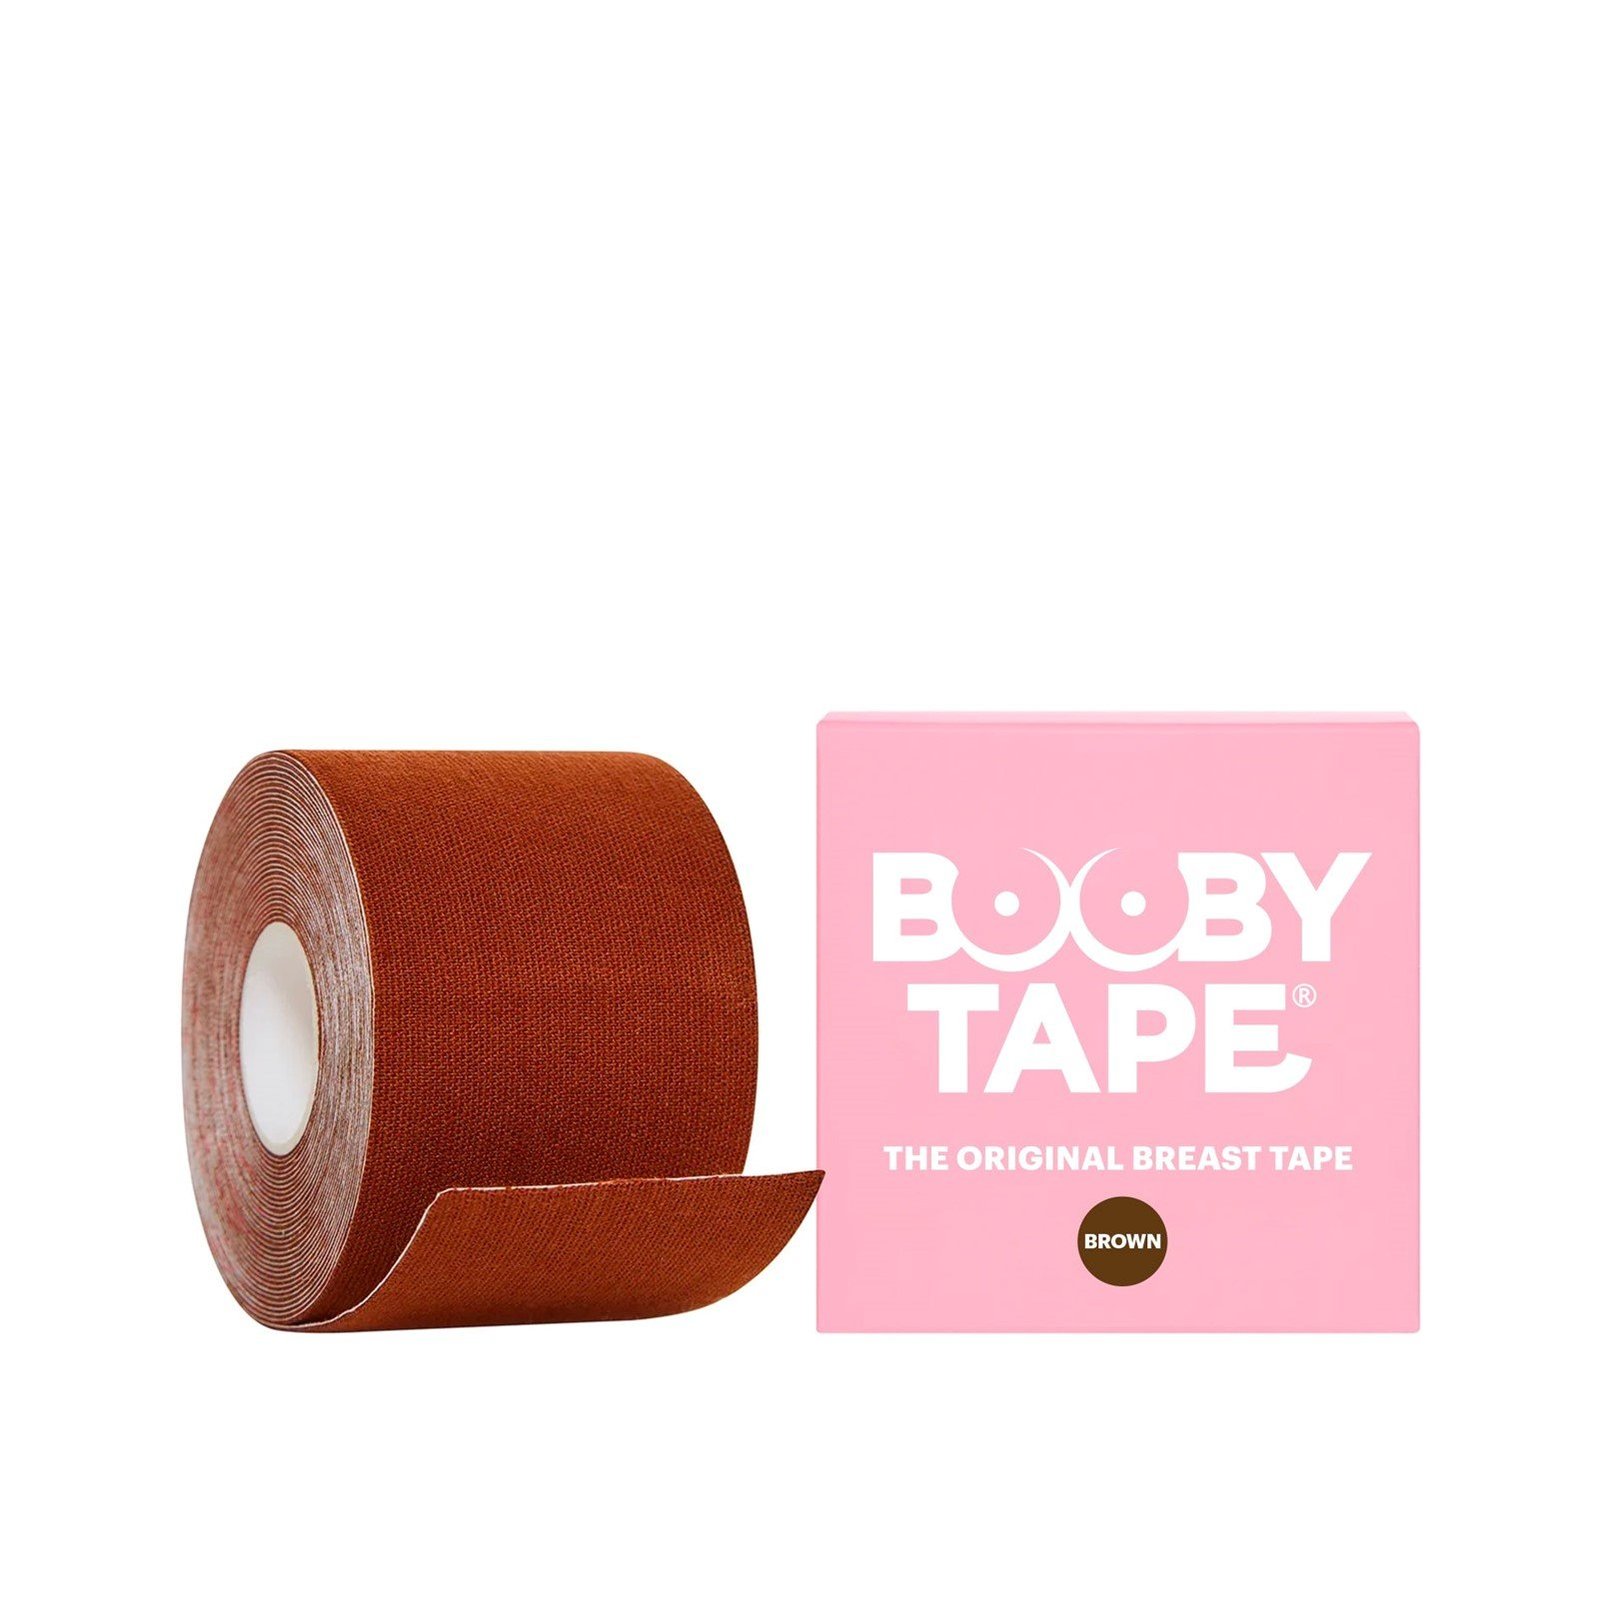 Buy Booby Tape The Original Breast Tape Brown 5m · Canada